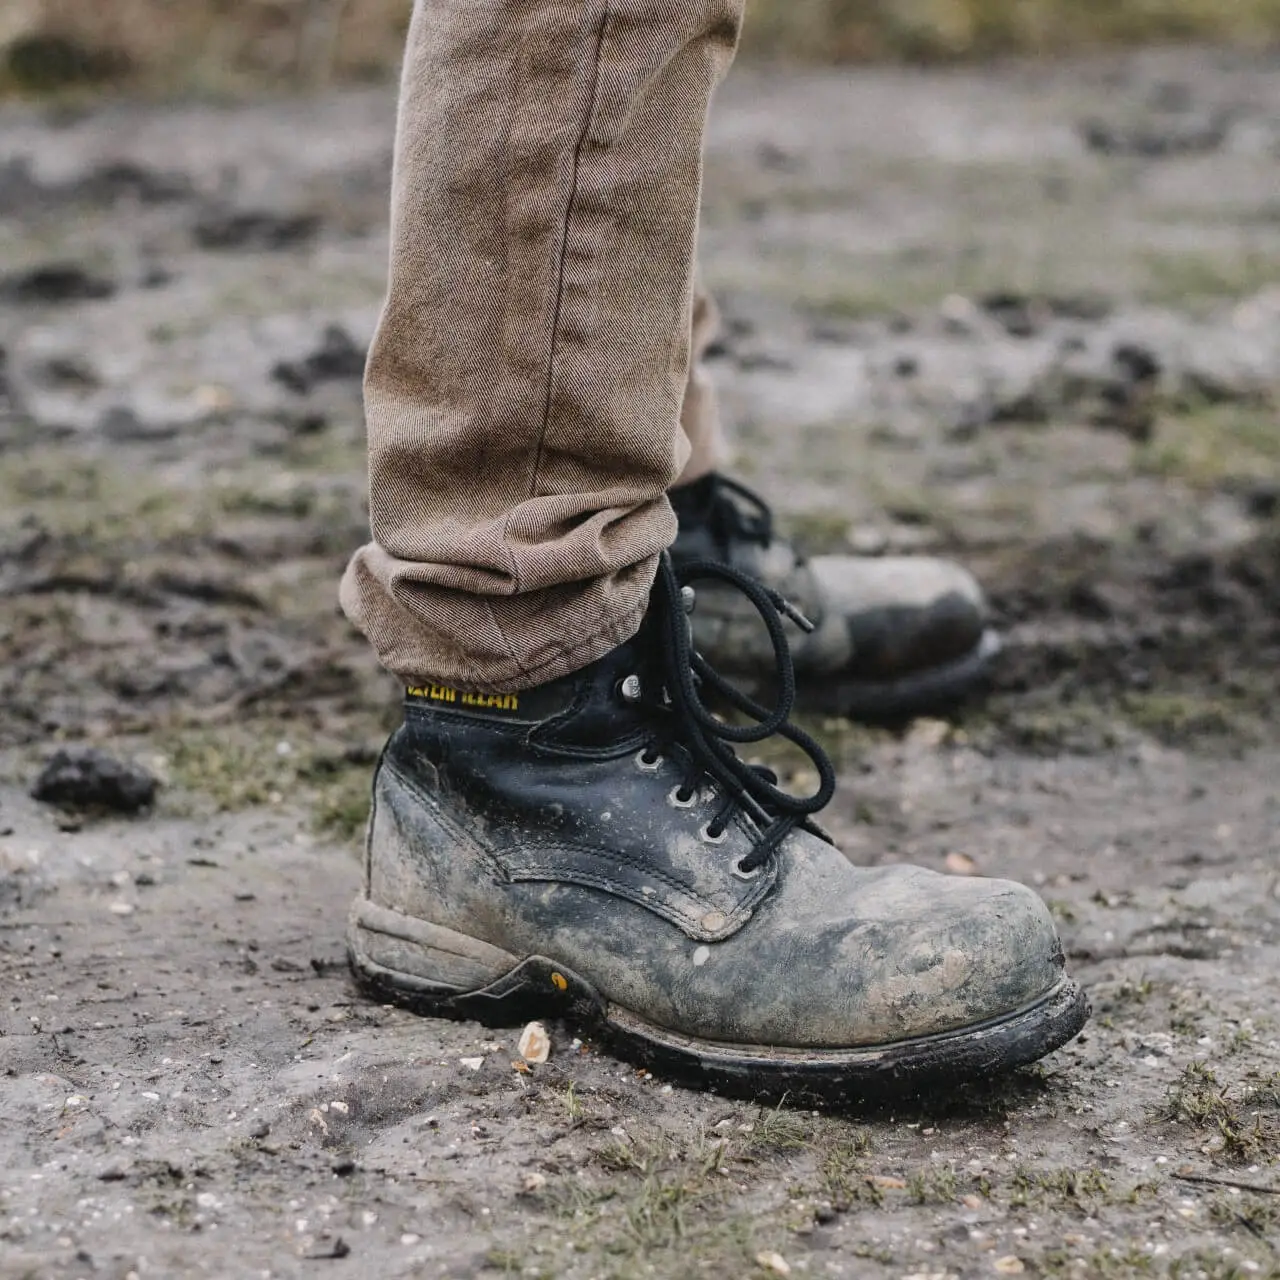 Person standing in muddy black hiking boots with oversized laces on a mud trail with sparse blades of grass.